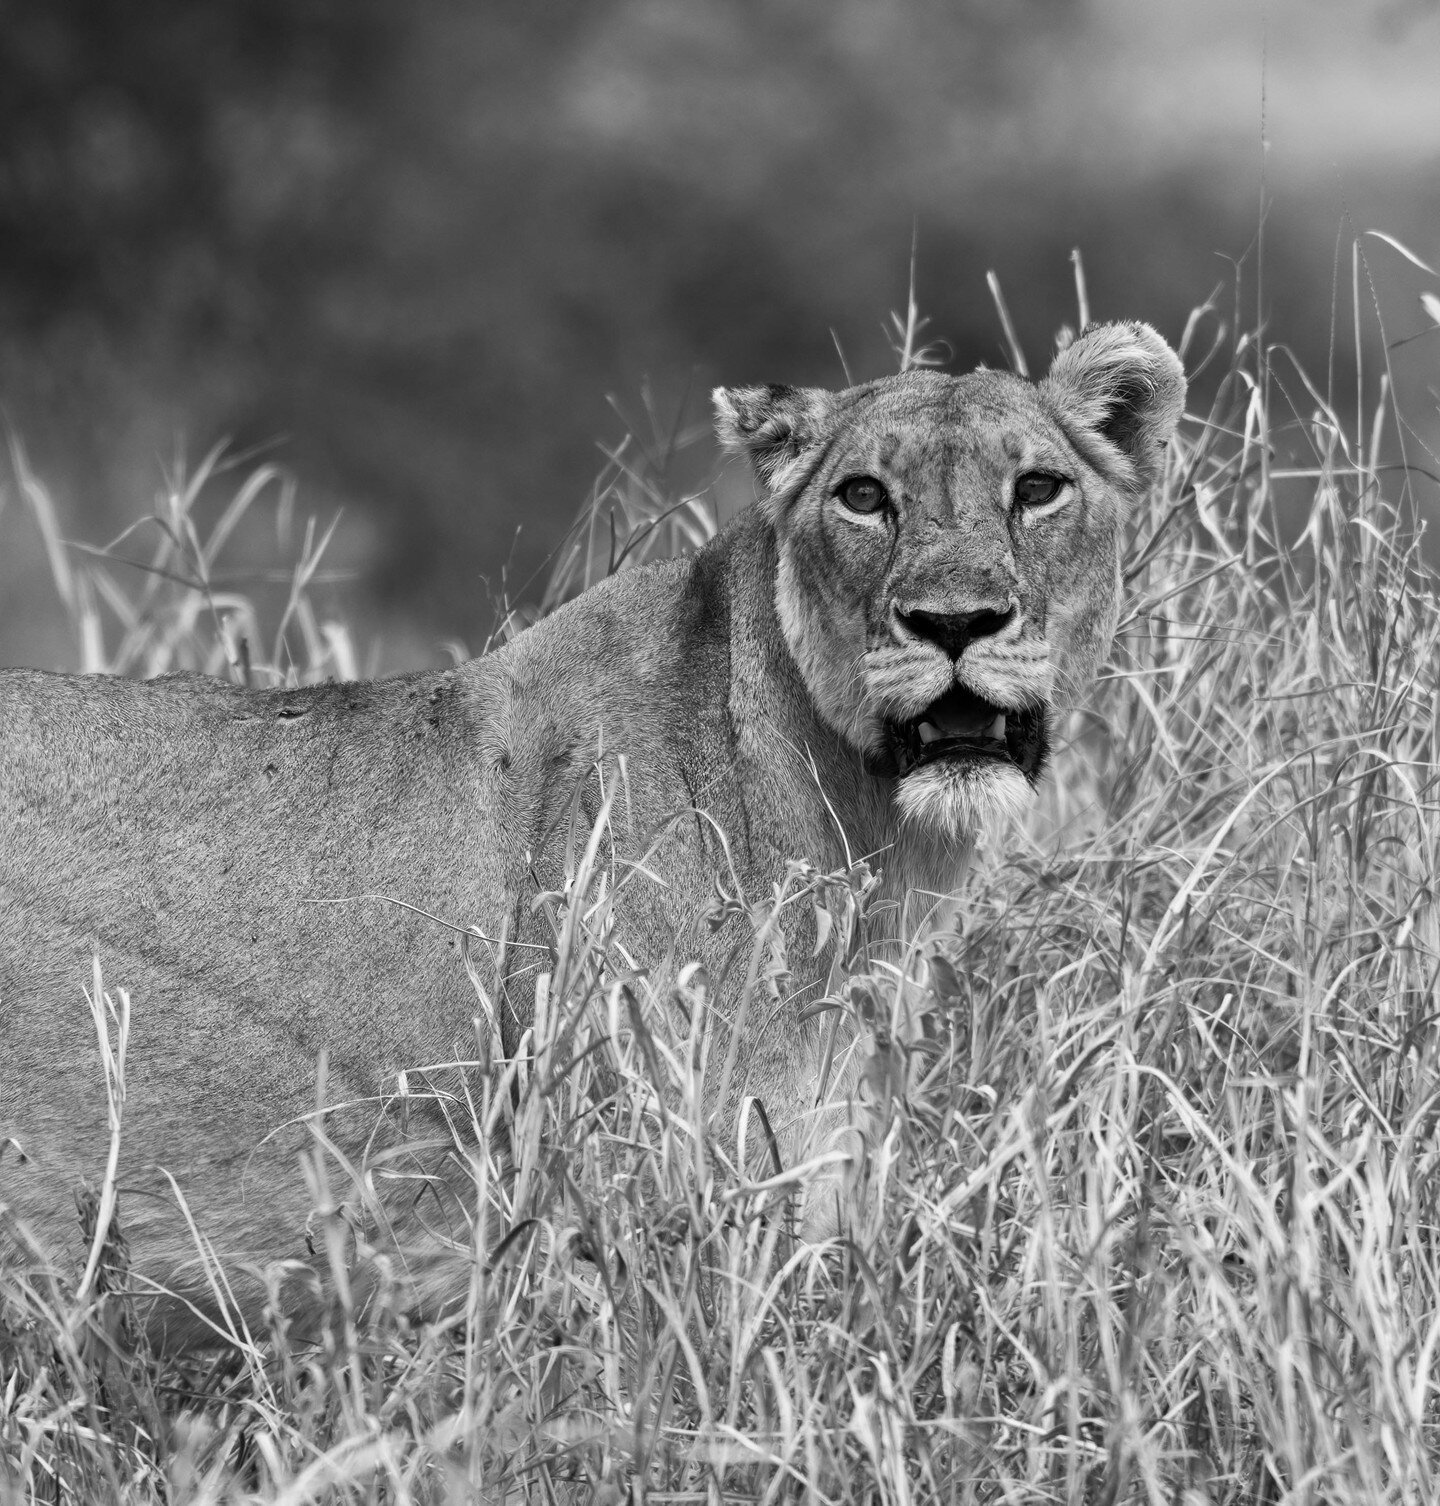 This, is one of my favorite photos I've personally taken. The particular mother lion here has seen some life, I think. Half an ear. Scars on her back. And a face that's oozing personality. When I came across her she was with some of her pride, loungi